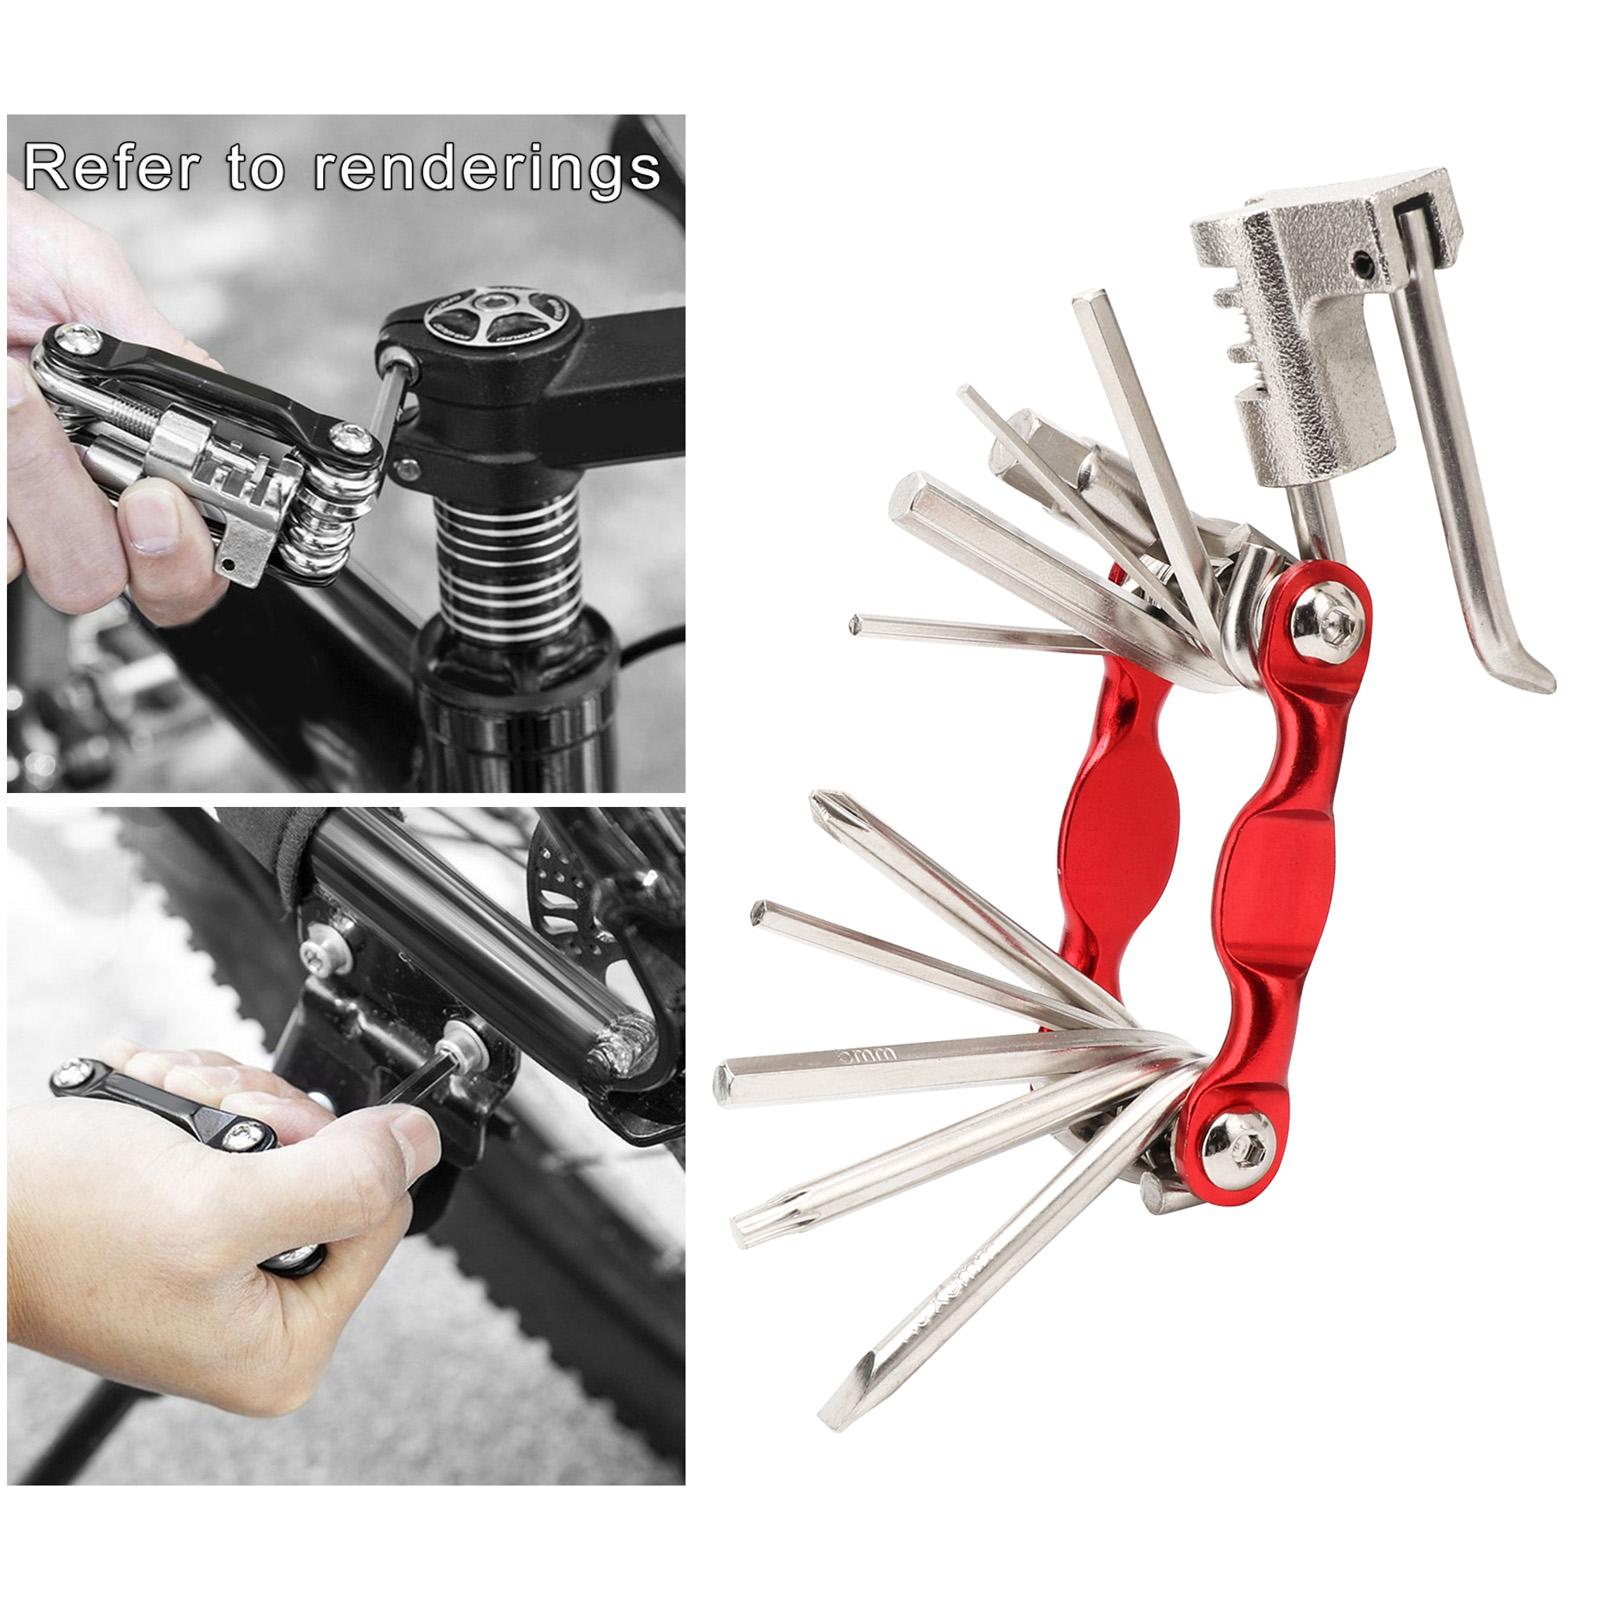 Portable Multifunction Bicycle Repair Tool Set 11 in 1 for Motorcycle red